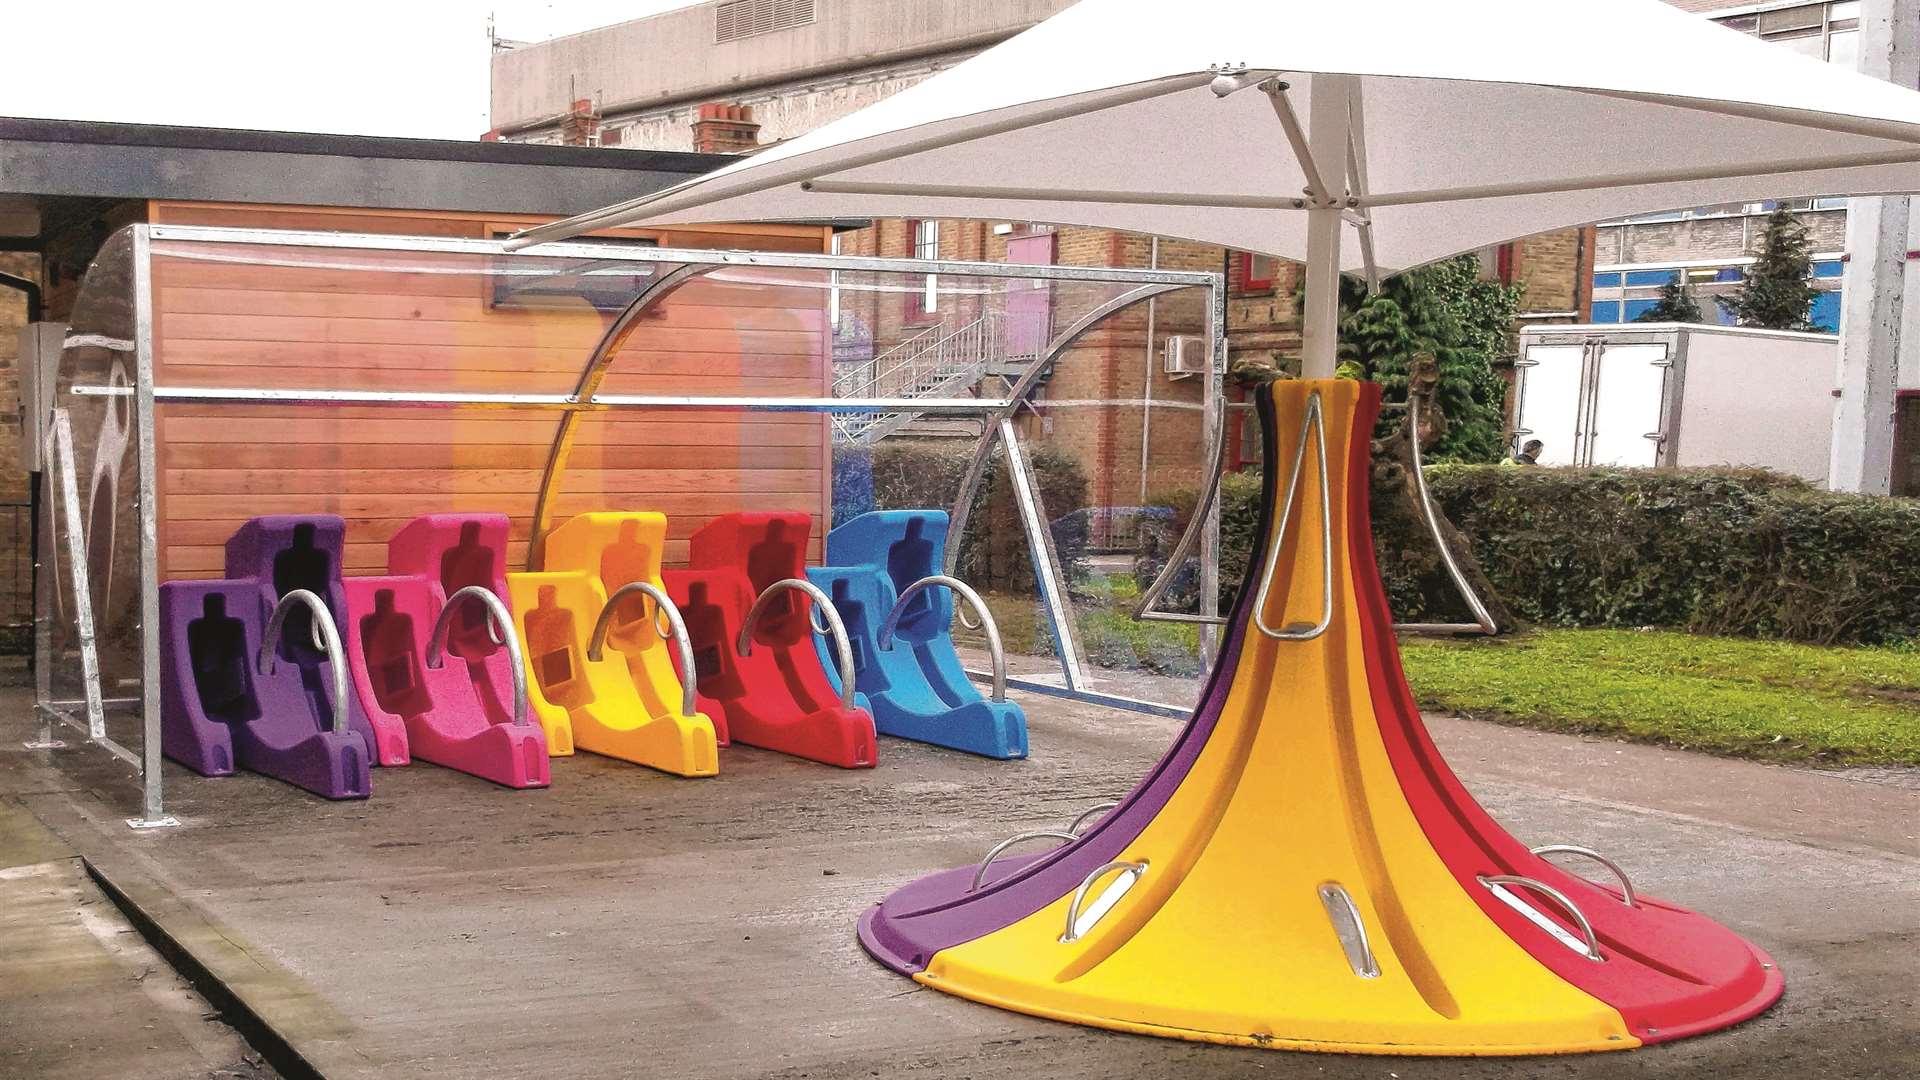 Cyclepods creates bike racks and shelters